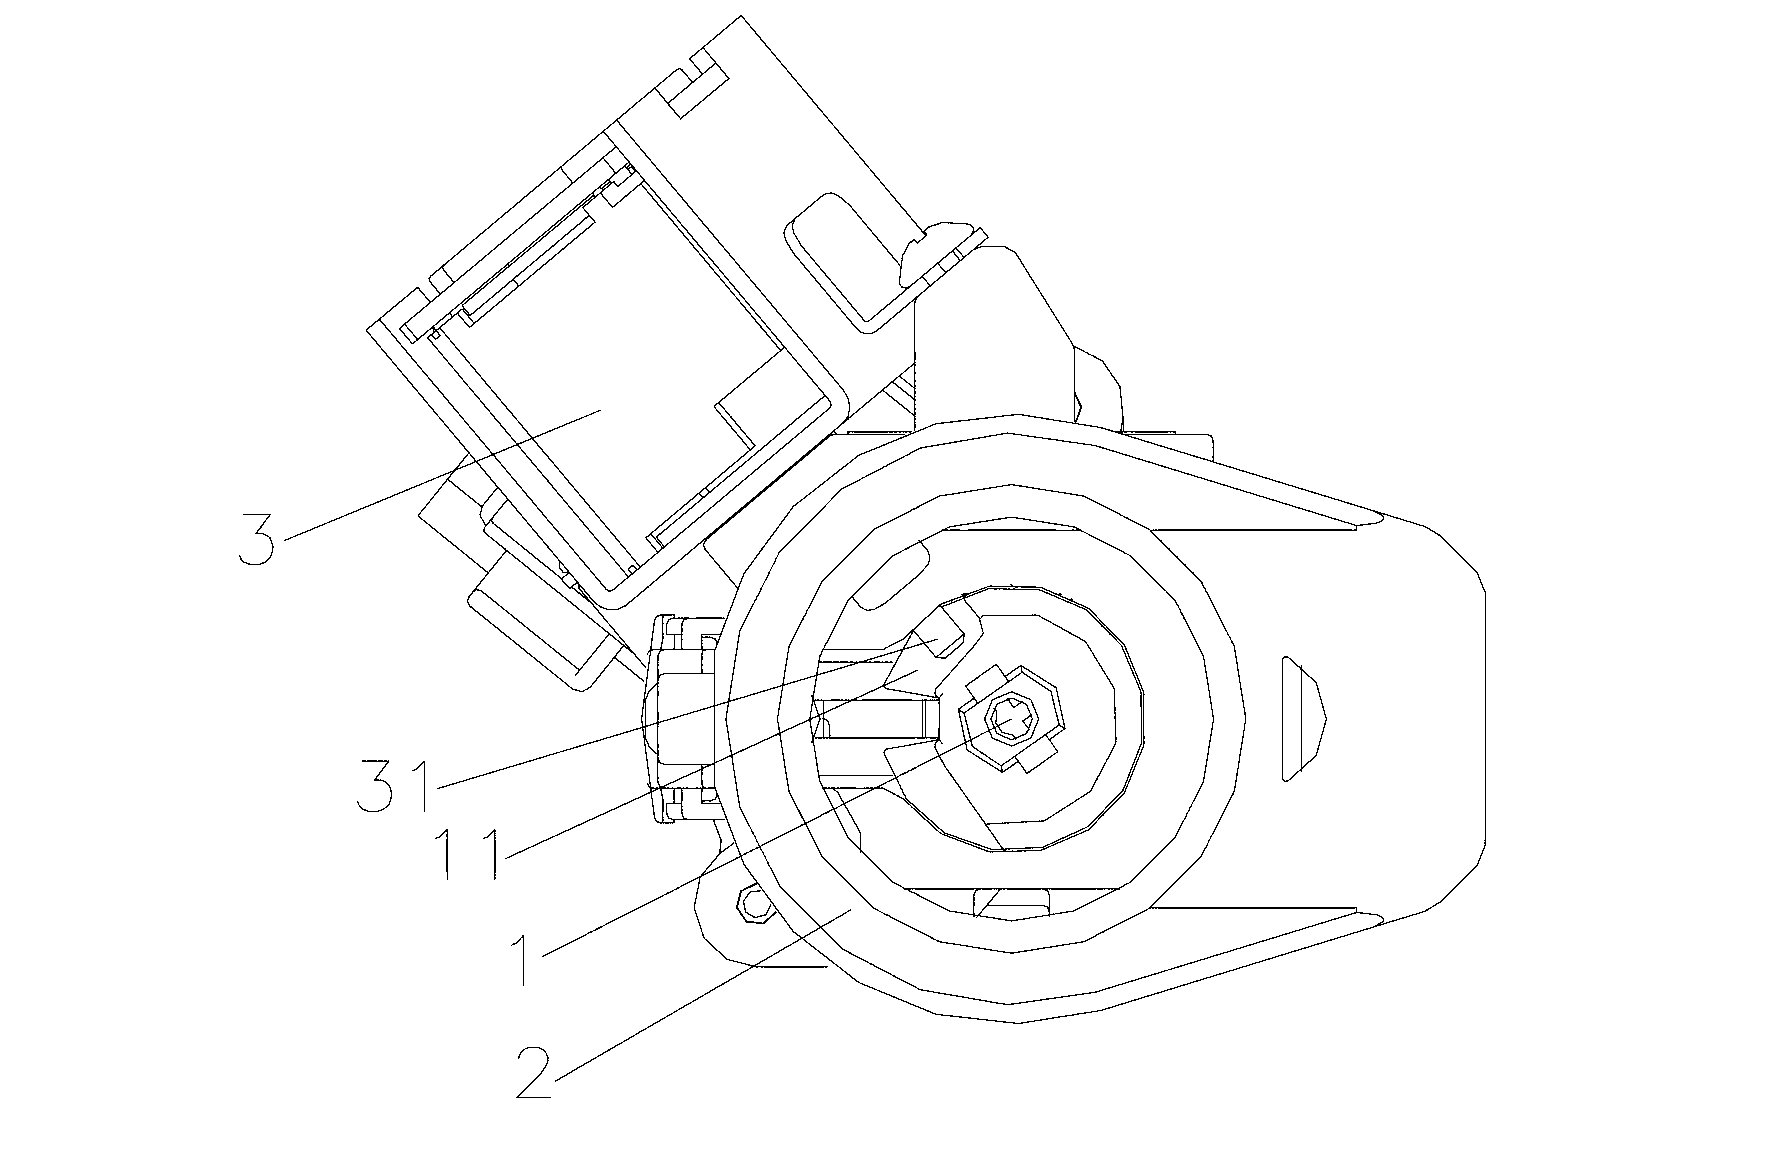 Anti-misoperation structure for ignition switch